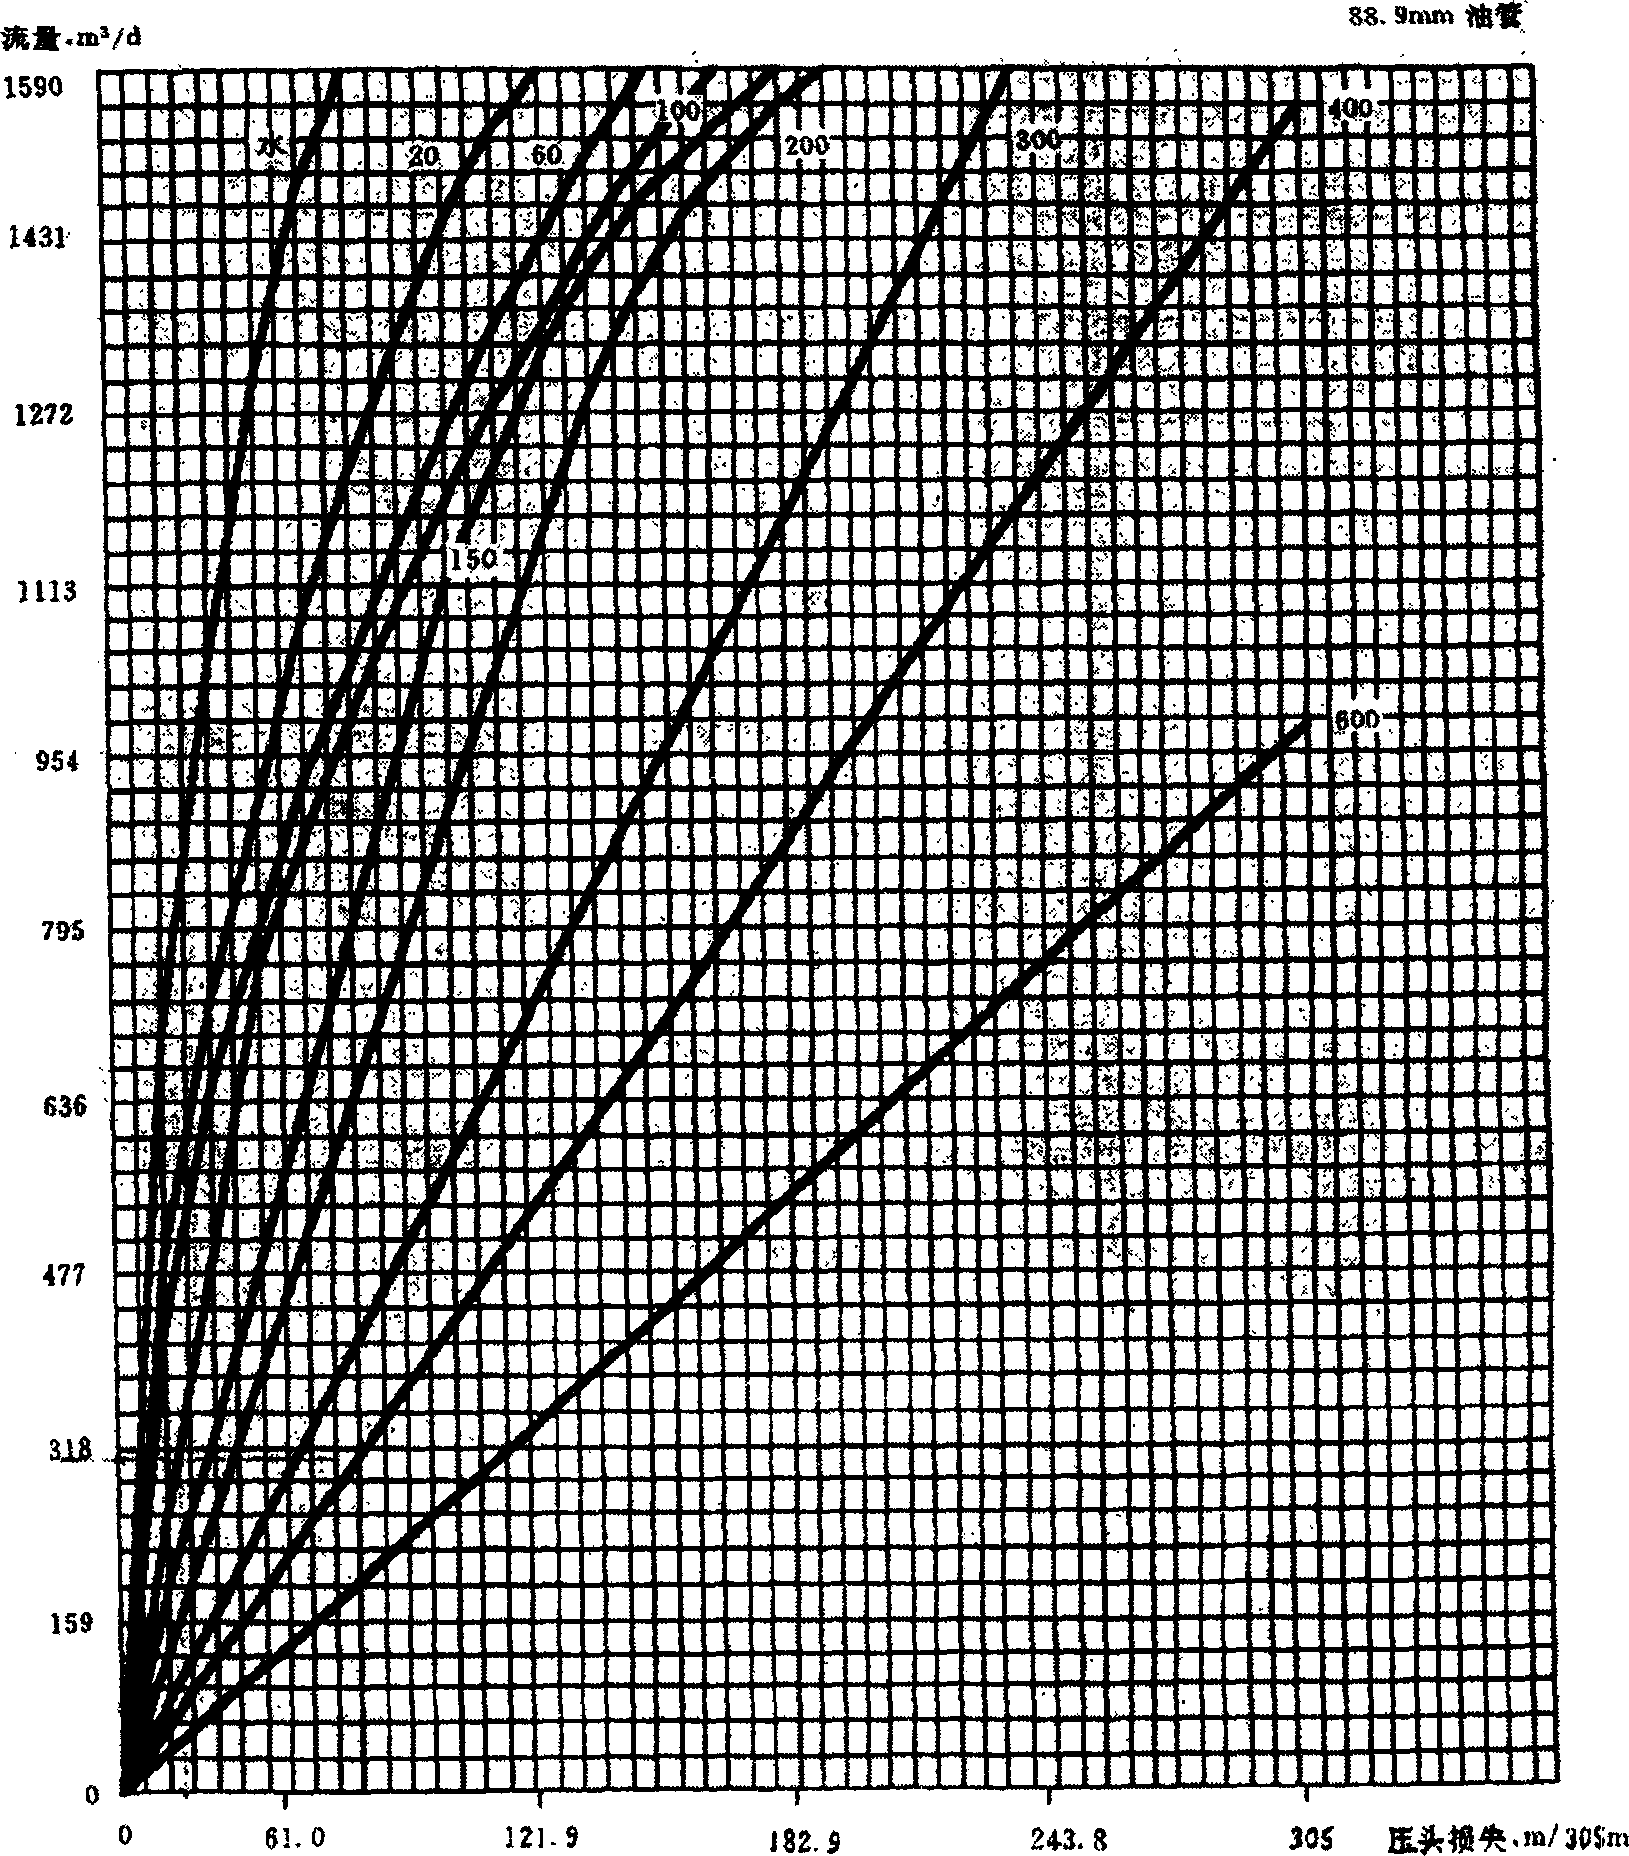 Method for automatic obtaining engineering parameter values of sampling points in graph by using computer